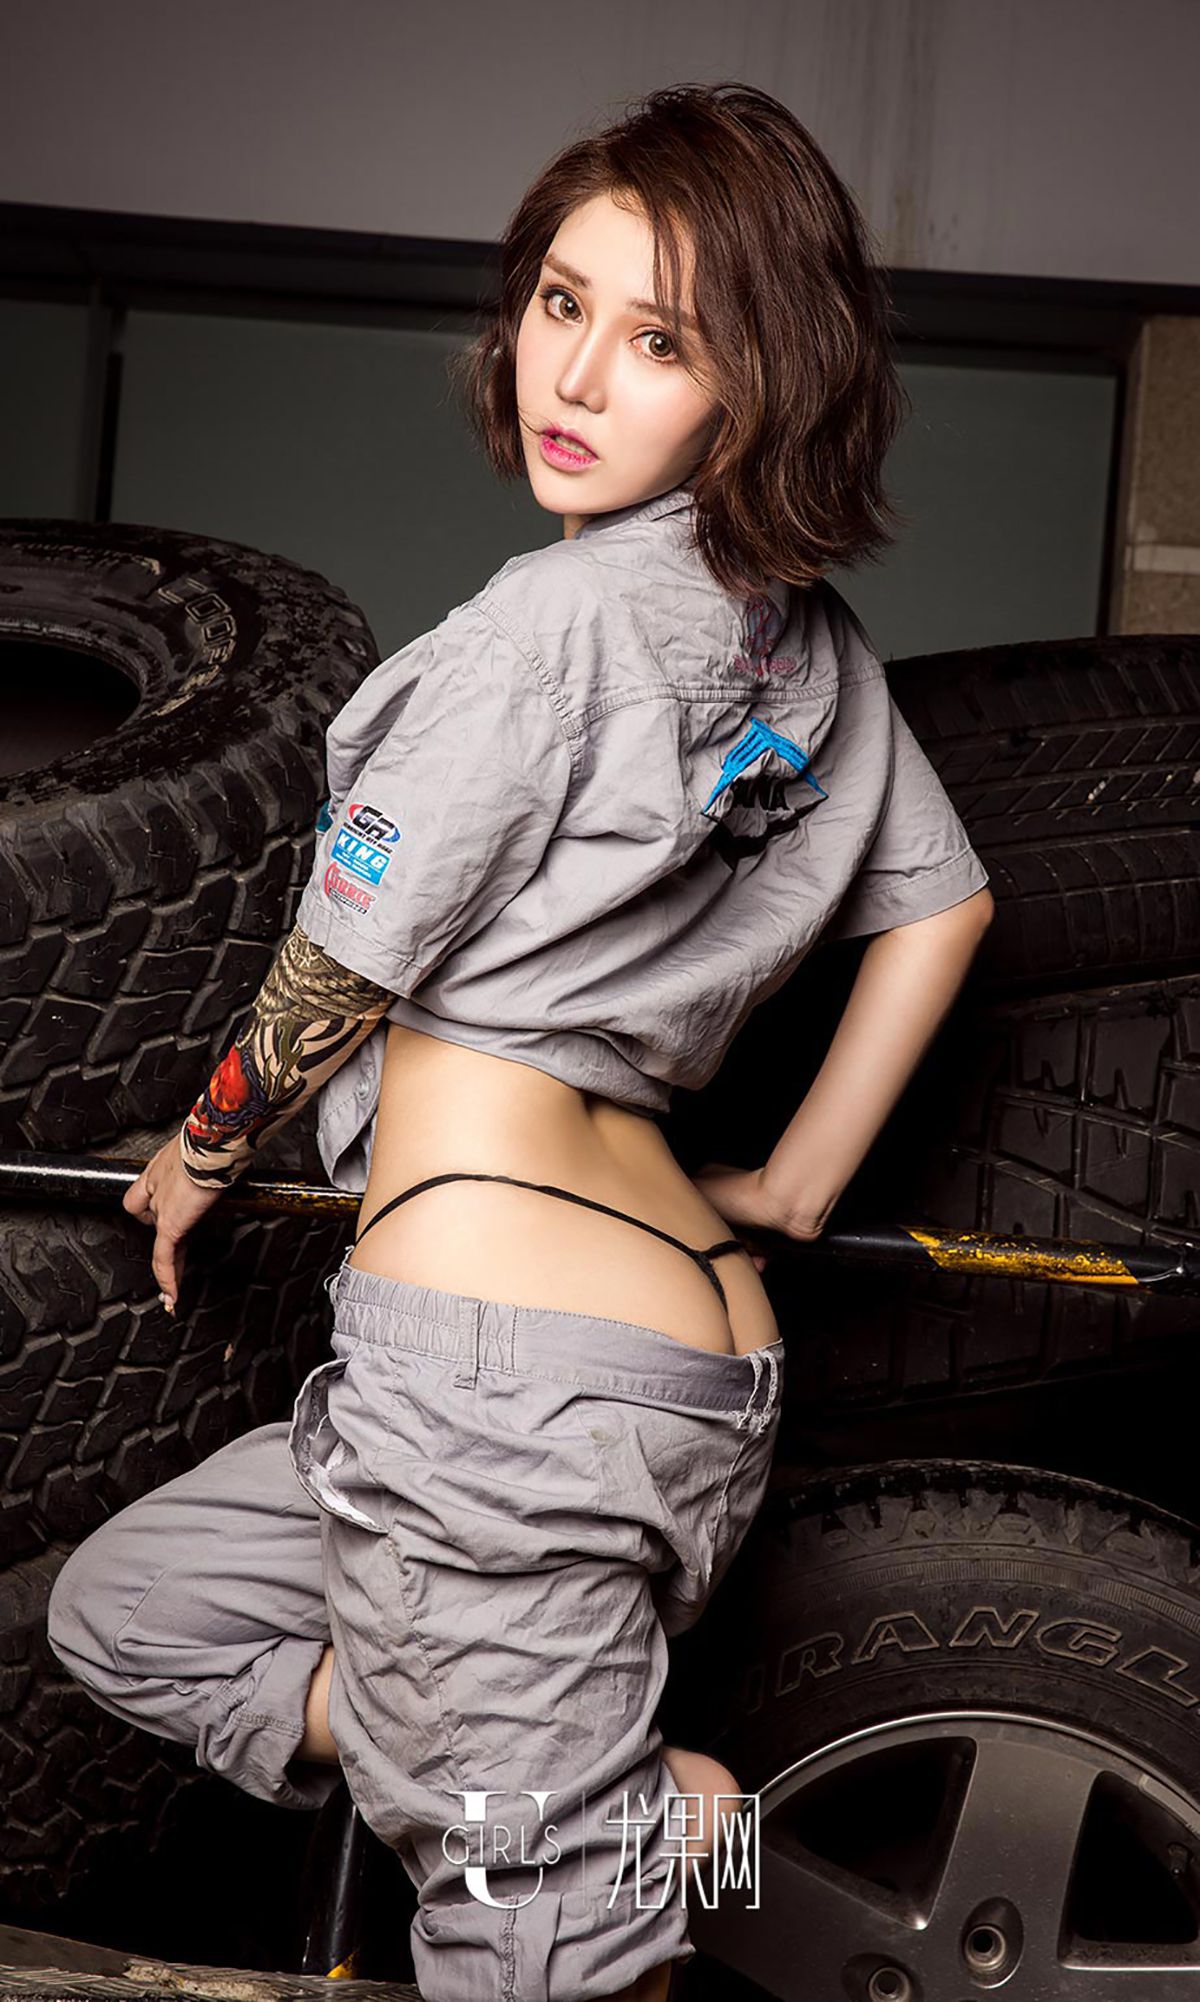 Wang Erlin’s “You Have to Be a Tender Girl to Repair Your Car” [爱尤物Ugirls] No.413 Photo Album